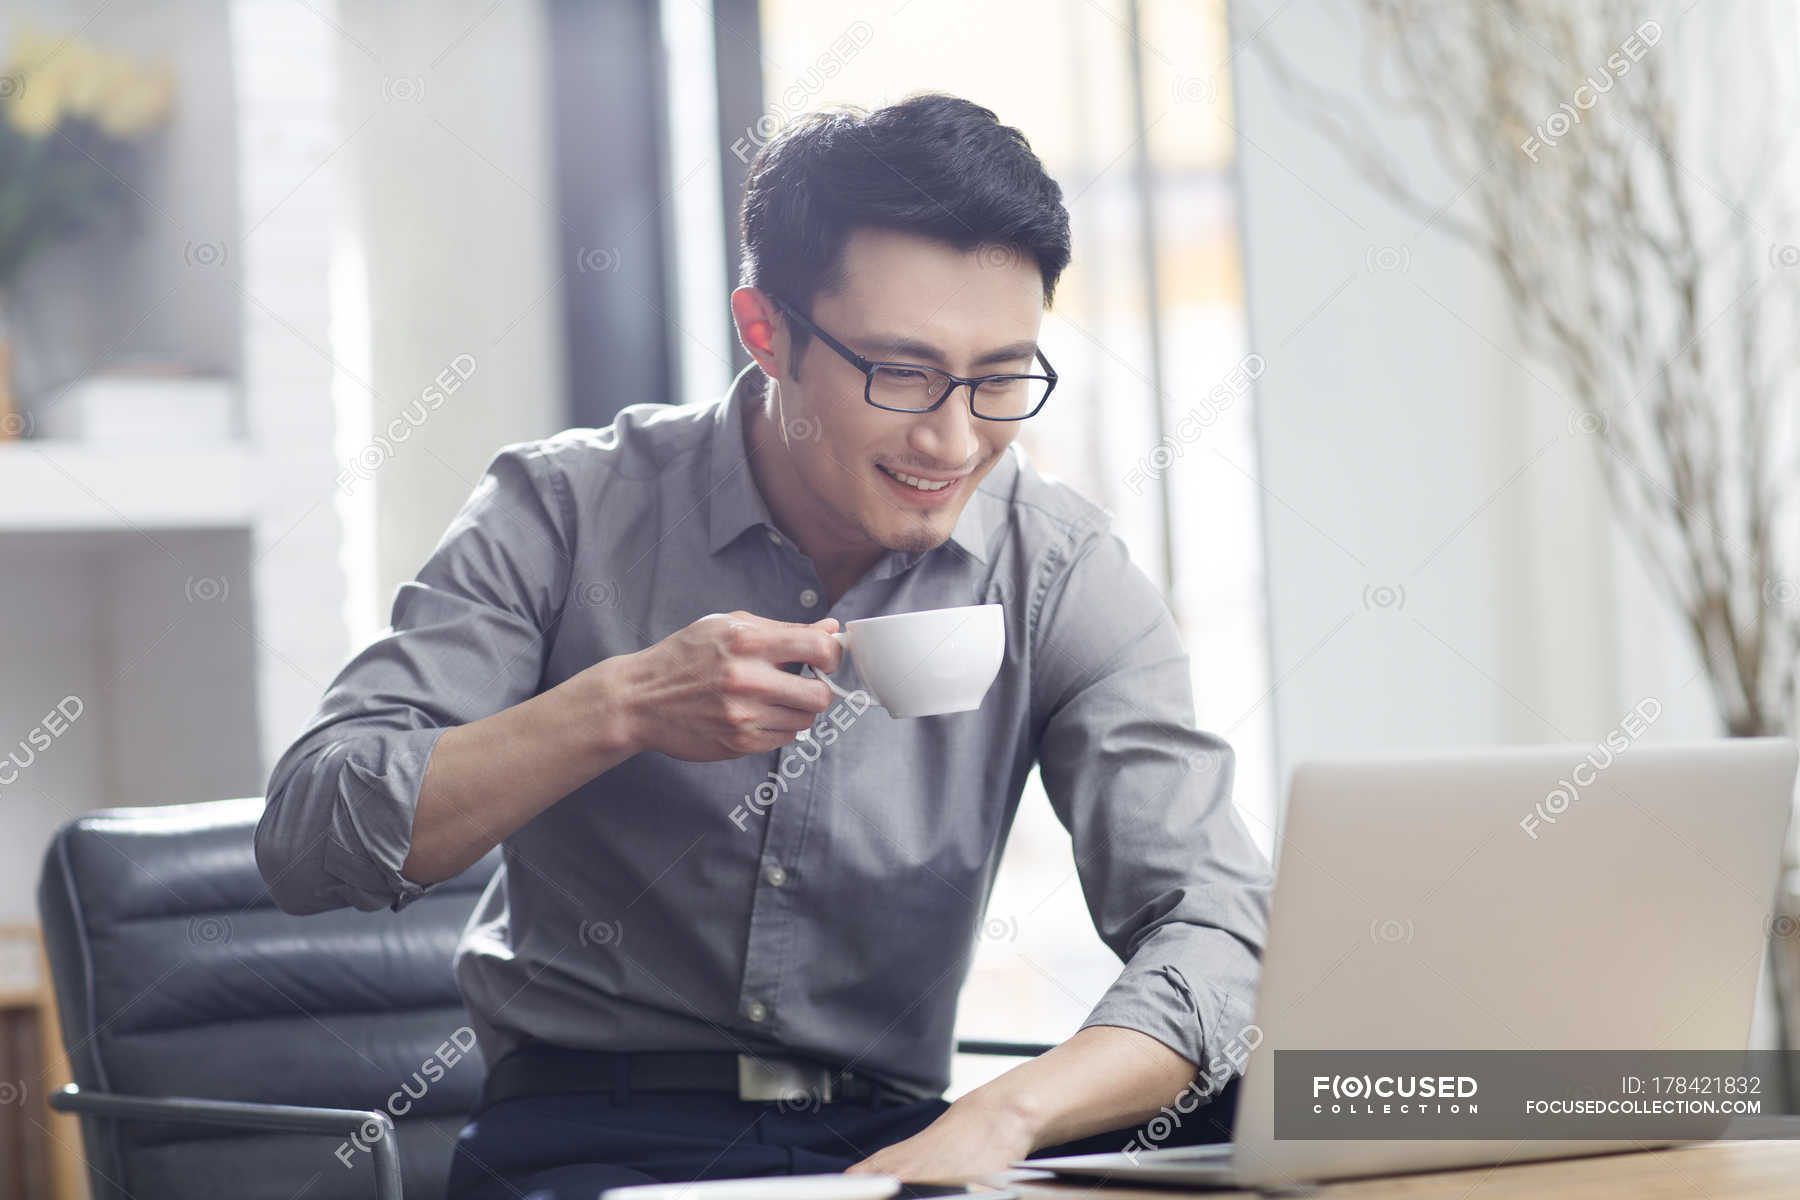 Asian man working with laptop and coffee in office — indoors, drink - Stock Photo | #178421832